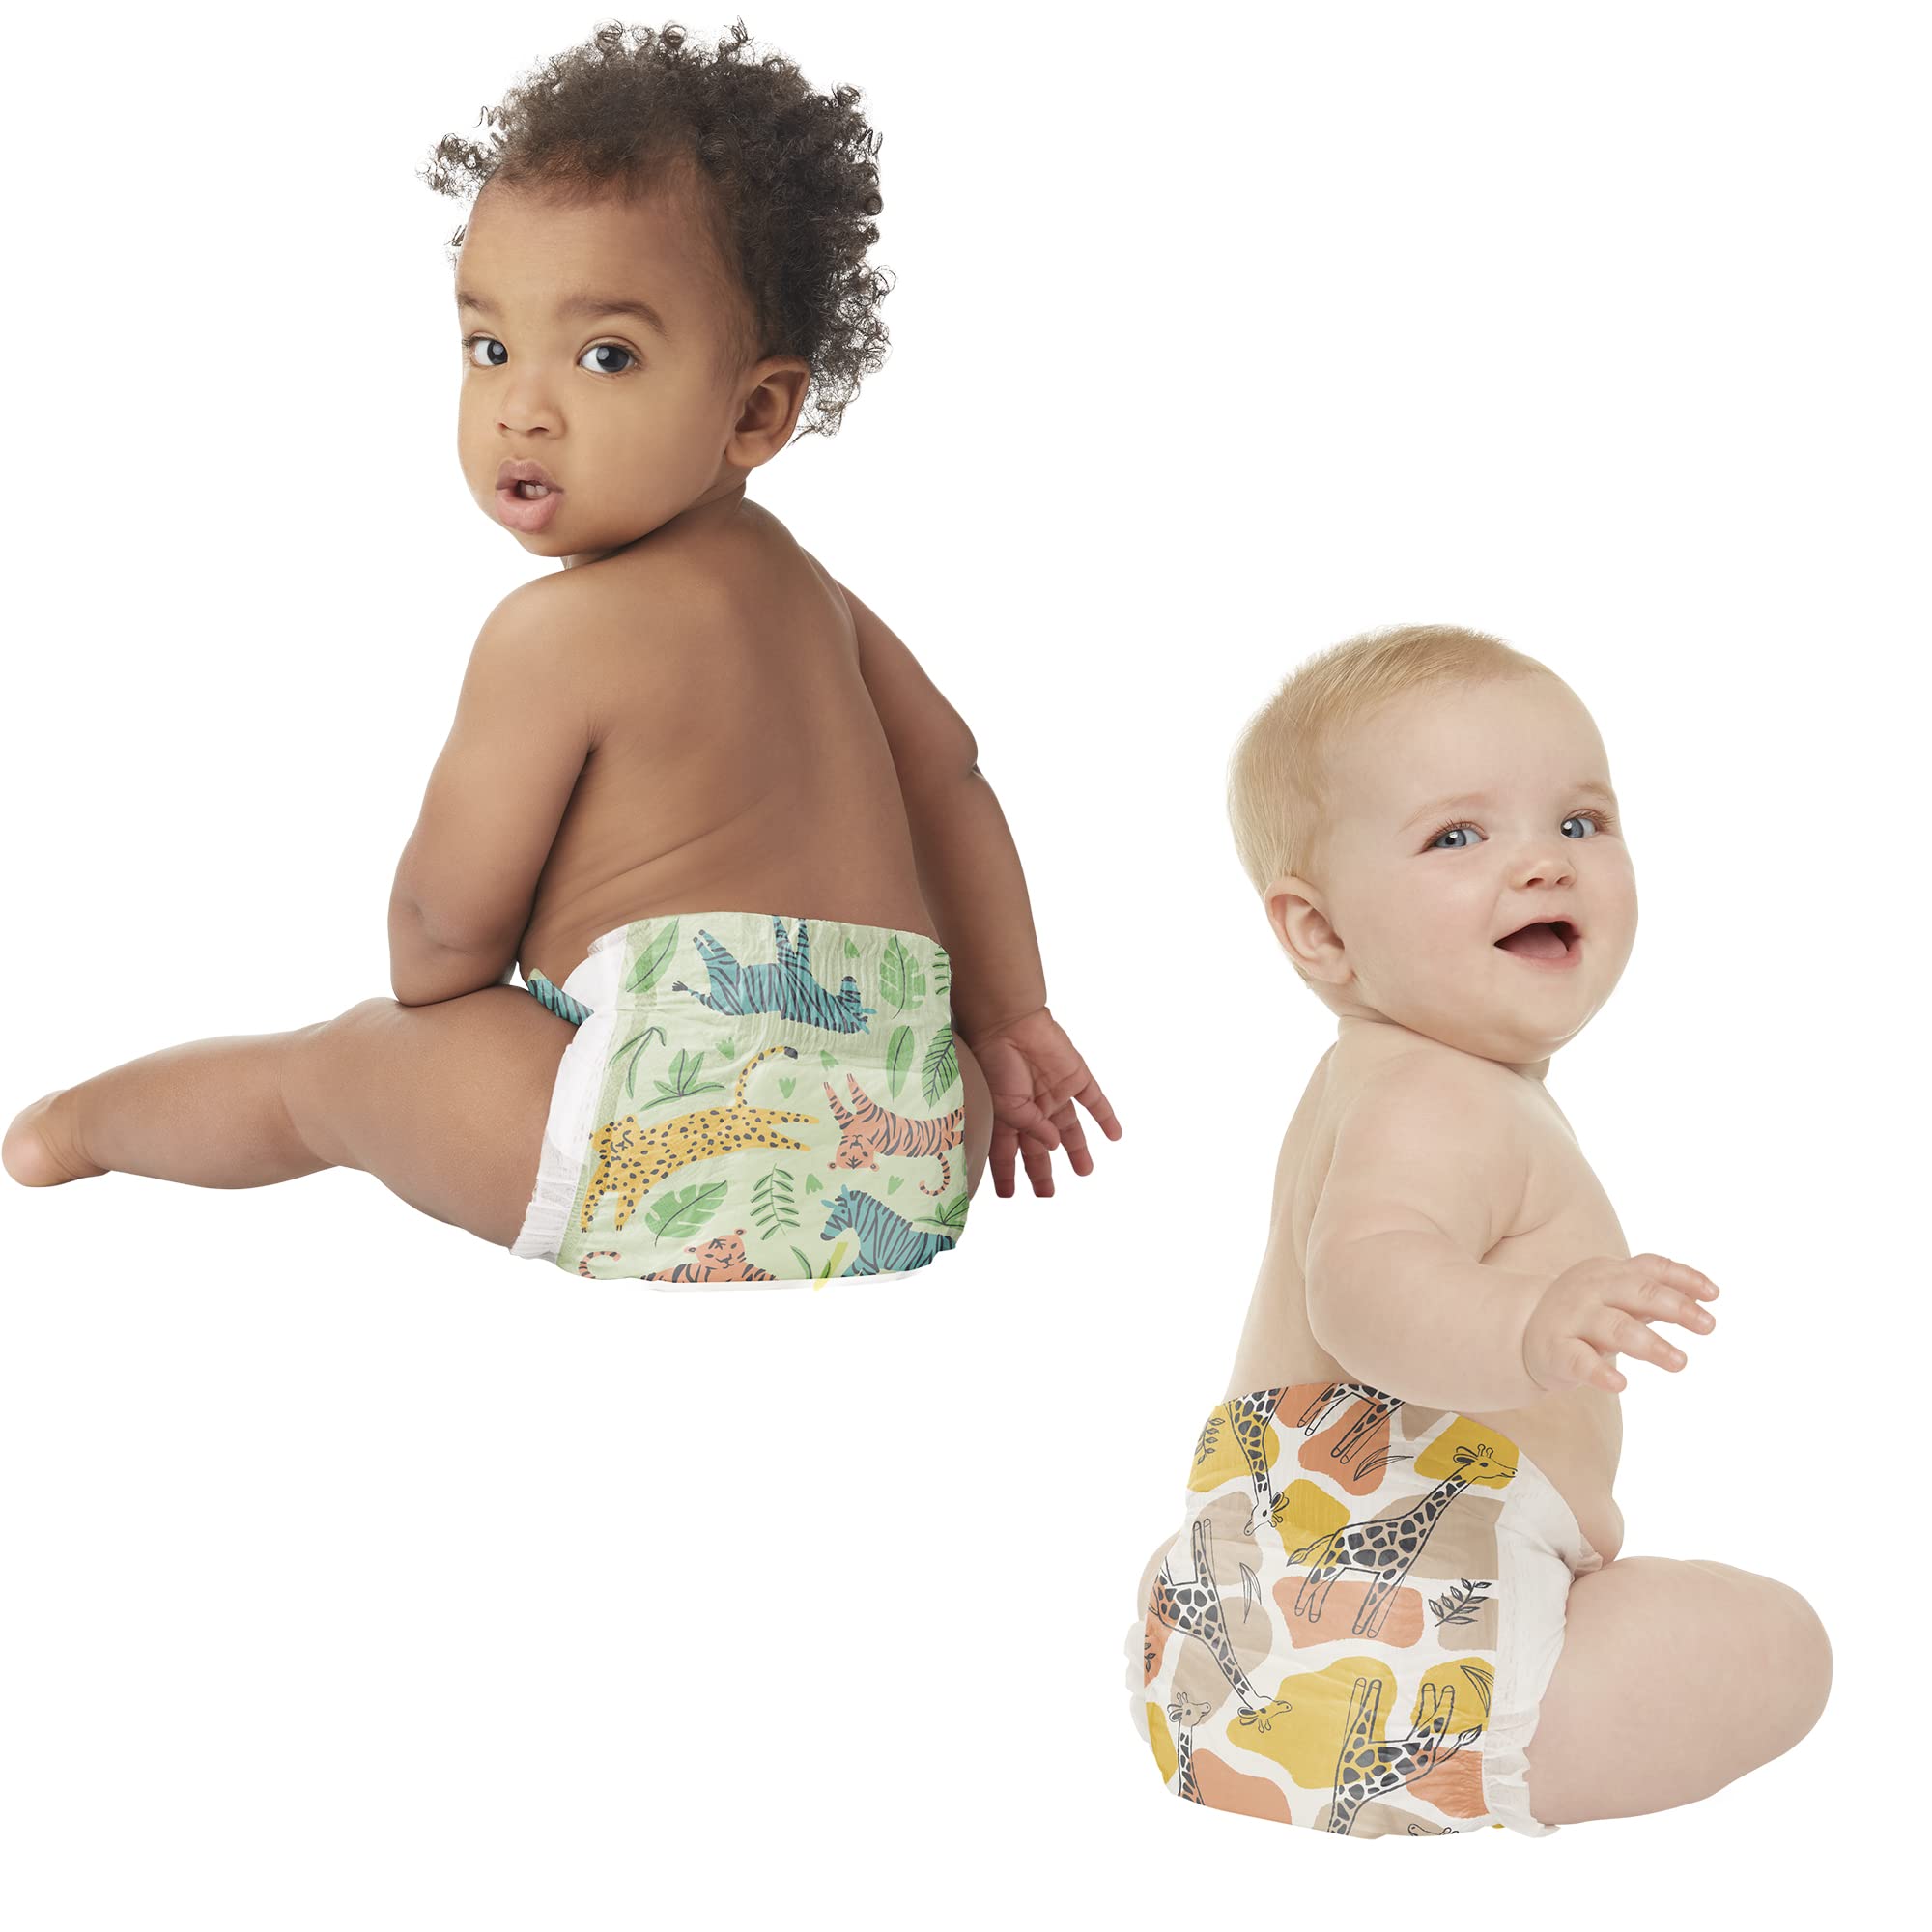 The Honest Company Clean Conscious Diapers | Plant-Based, Sustainable | Stripe Safari & Seeing Spots | Club Box, Size 3 (16-28 lbs), 68 Count